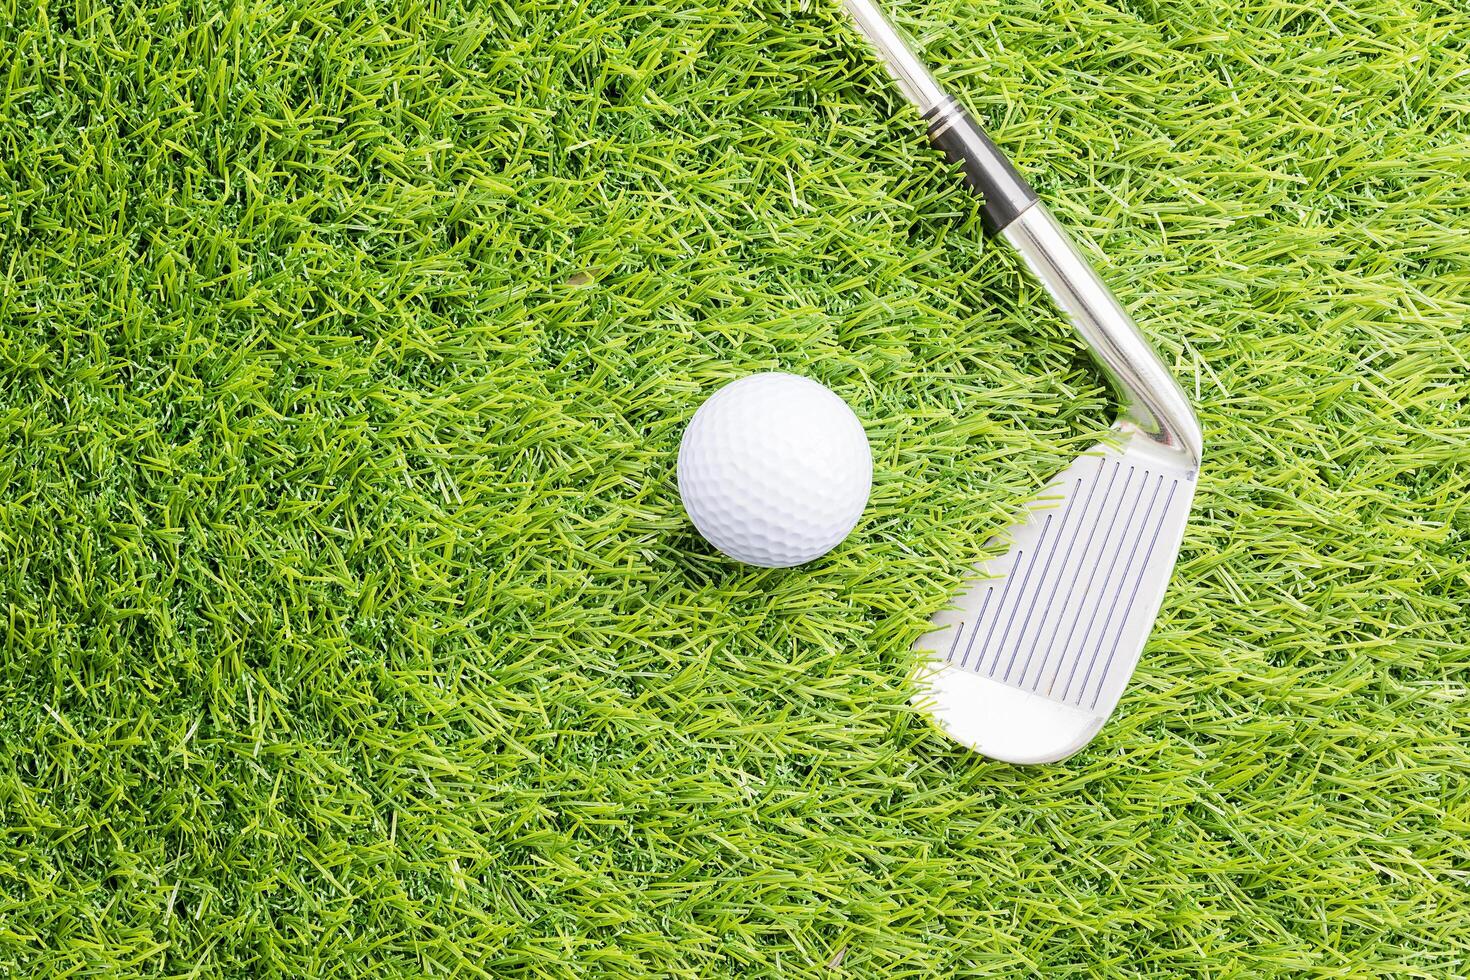 Sport object related to golf equipment photo